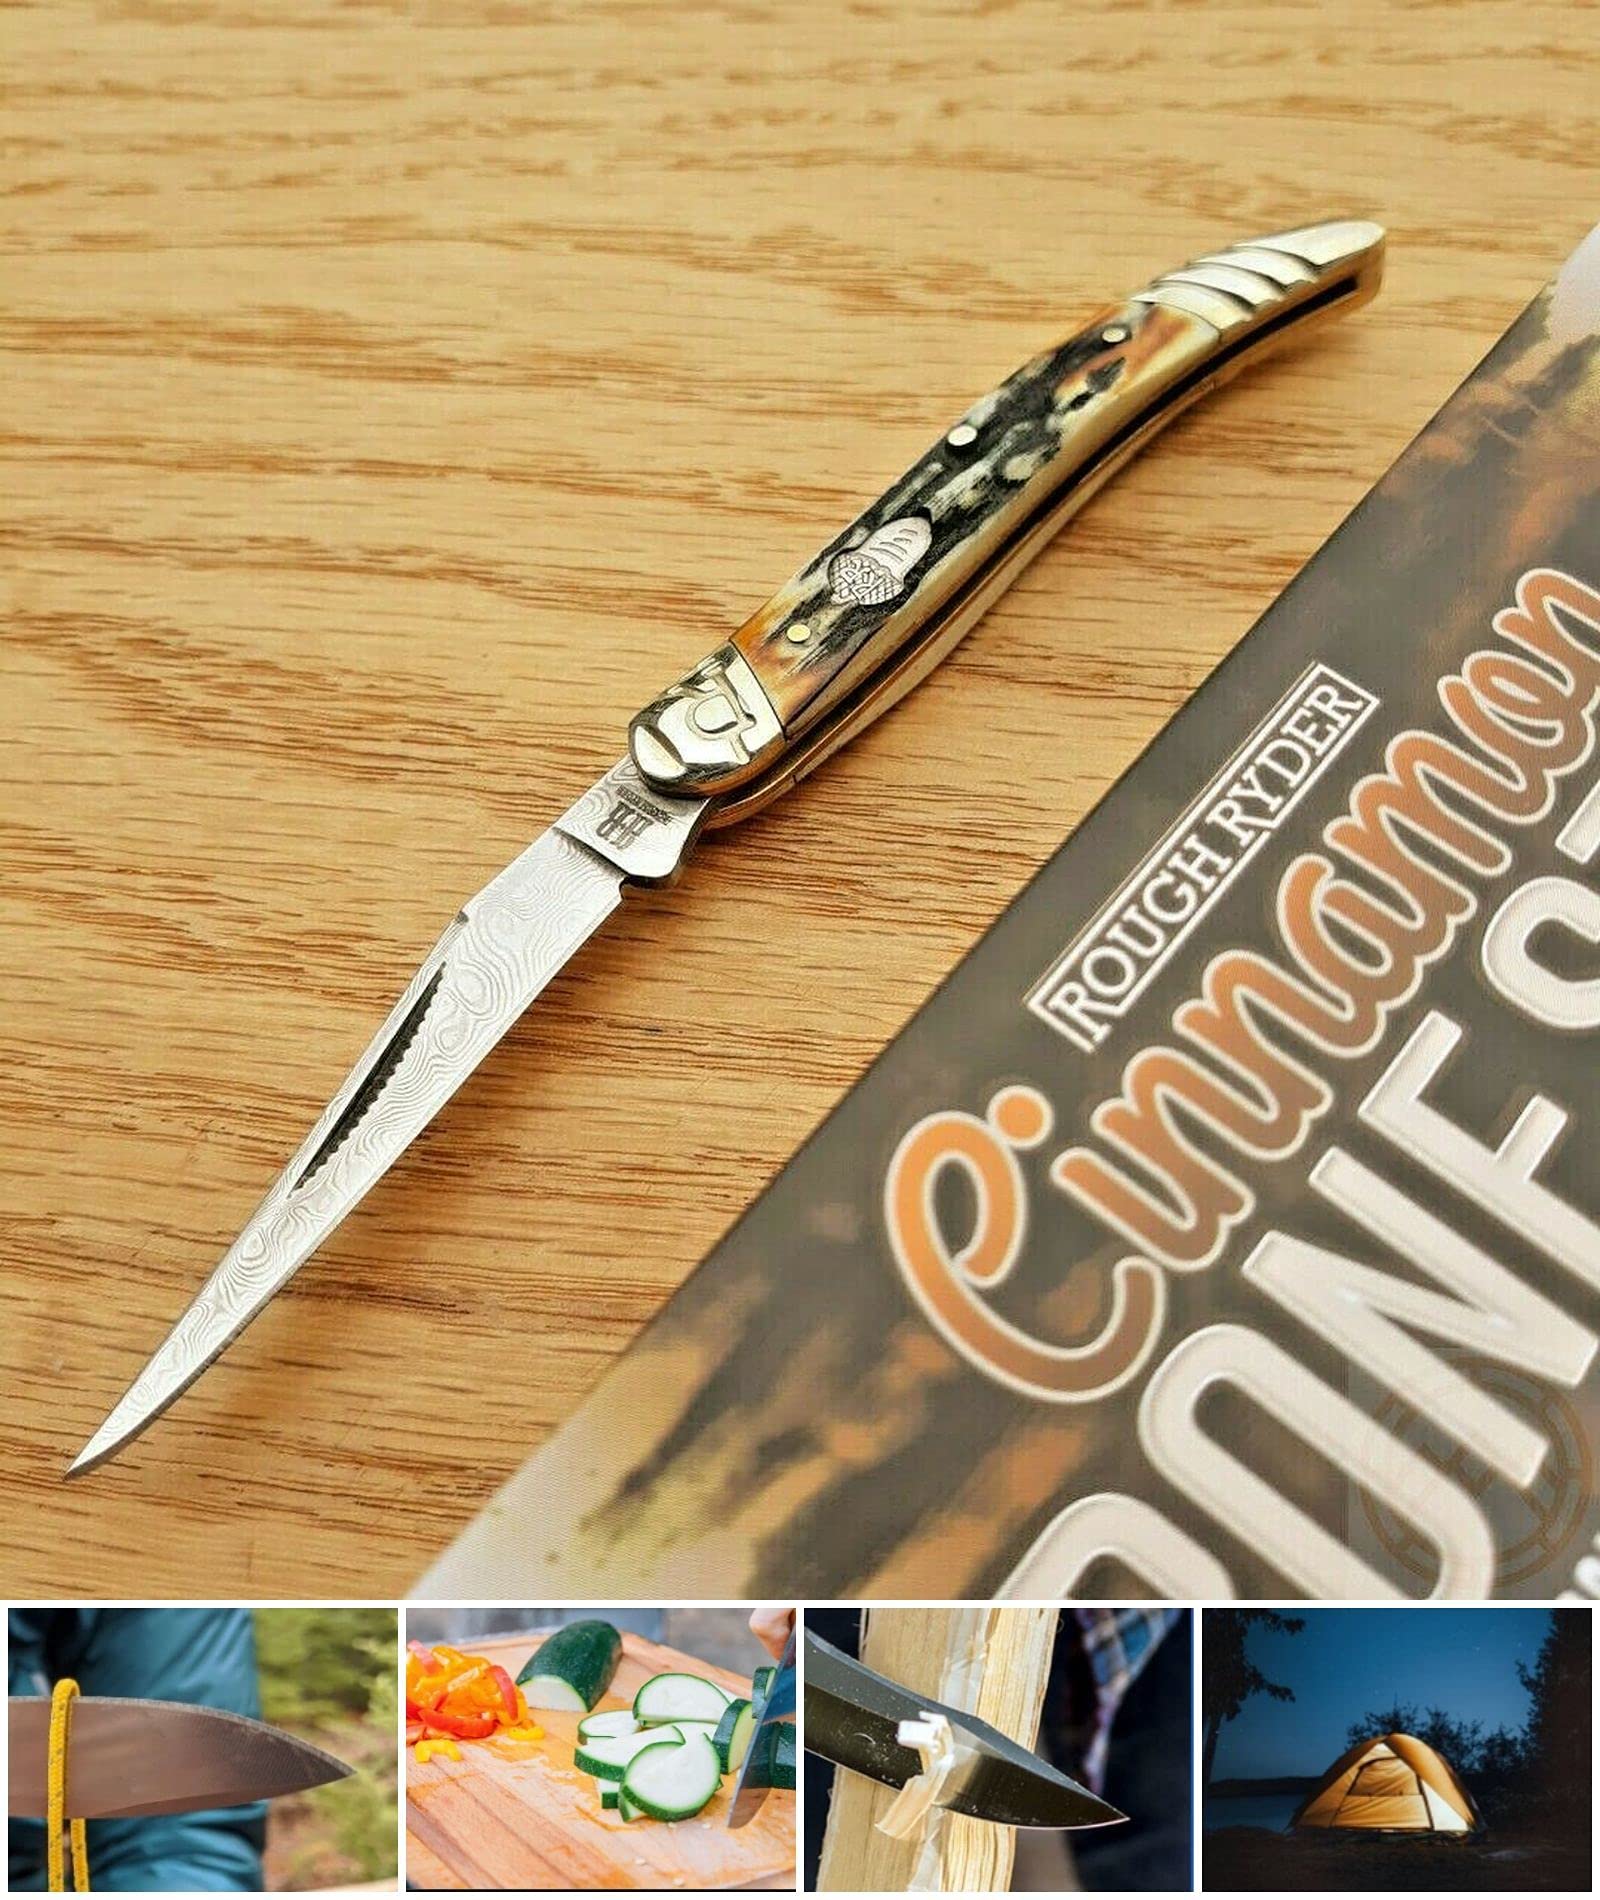 Toothpick Open Folding Pocket Knife Steel Clip Blade Stag Bone Handle Outdoor Survival Hunting Knife for Camping by Survival Steel